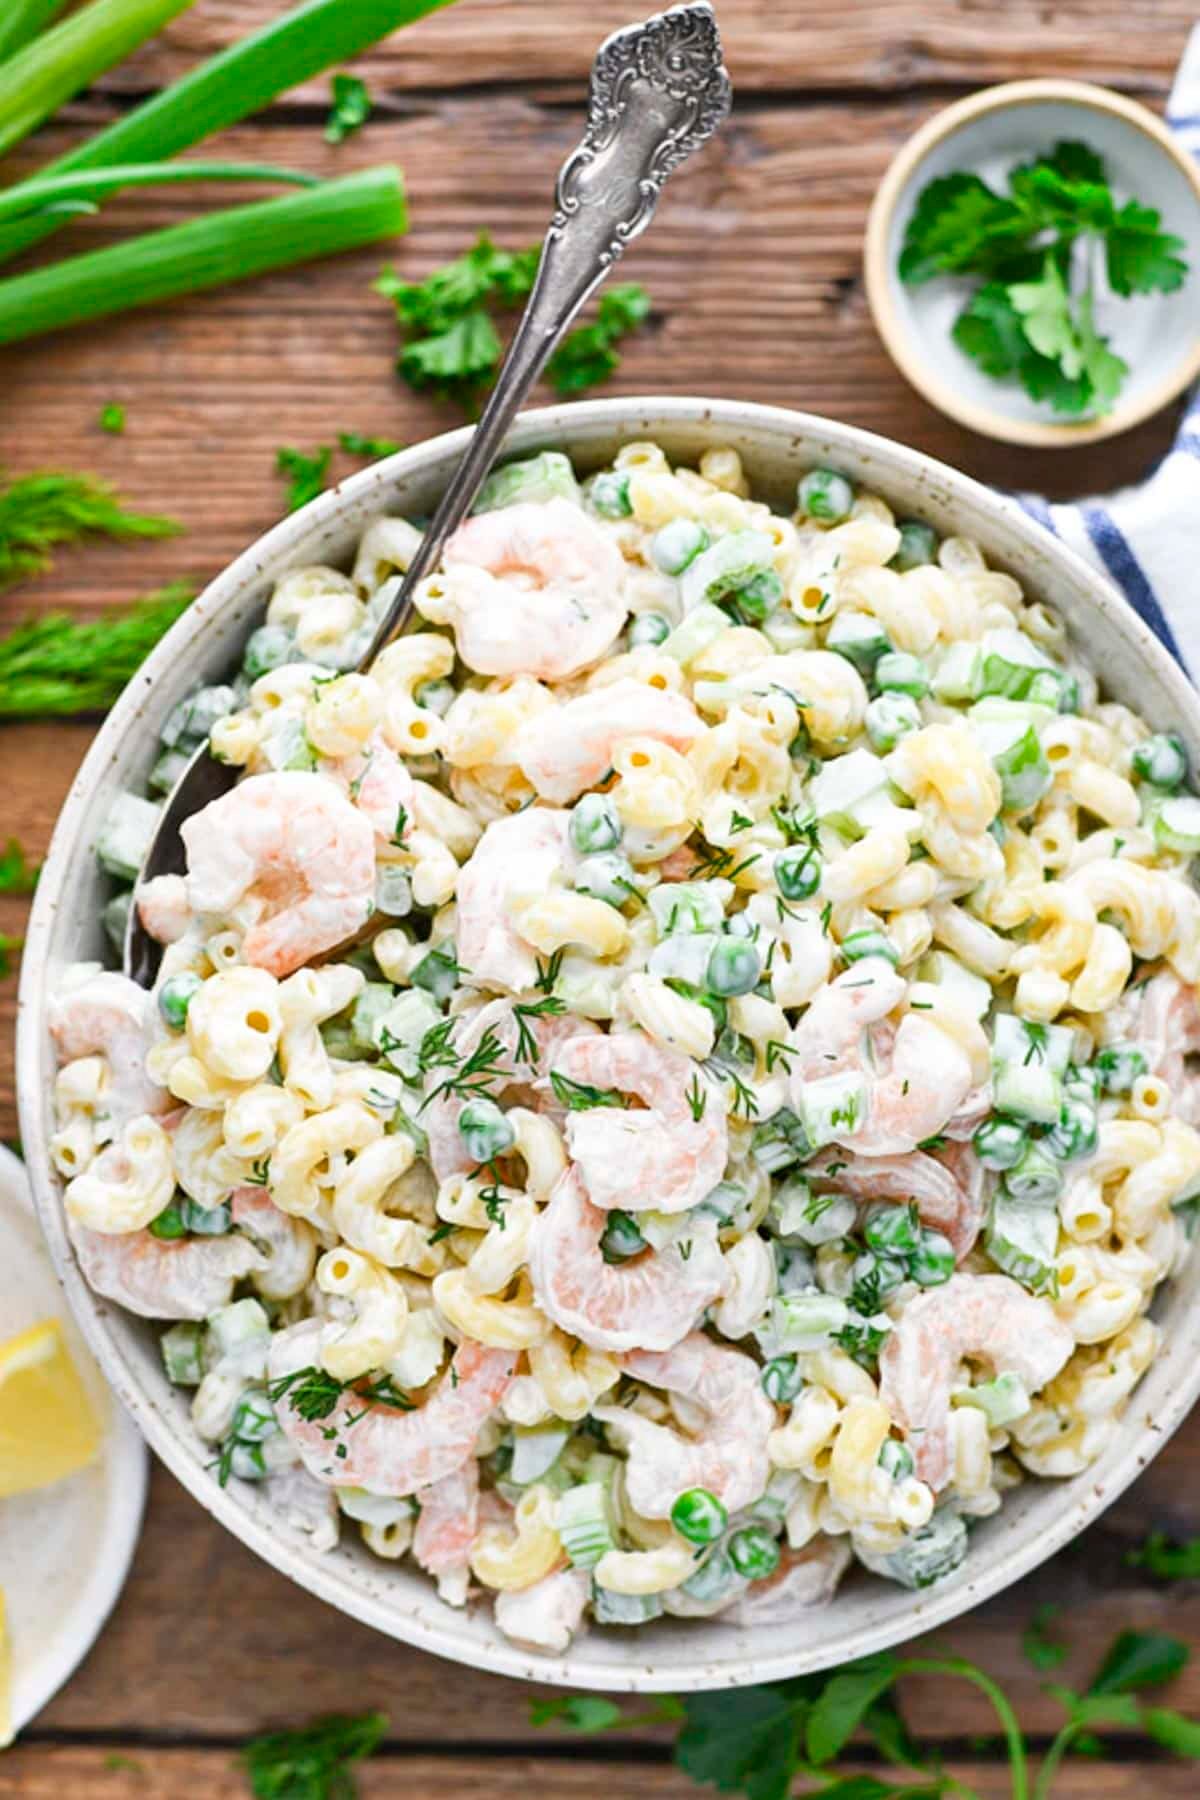 Overhead image of shrimp pasta salad recipe on a table with a side of green onions, lemon, and parsley.